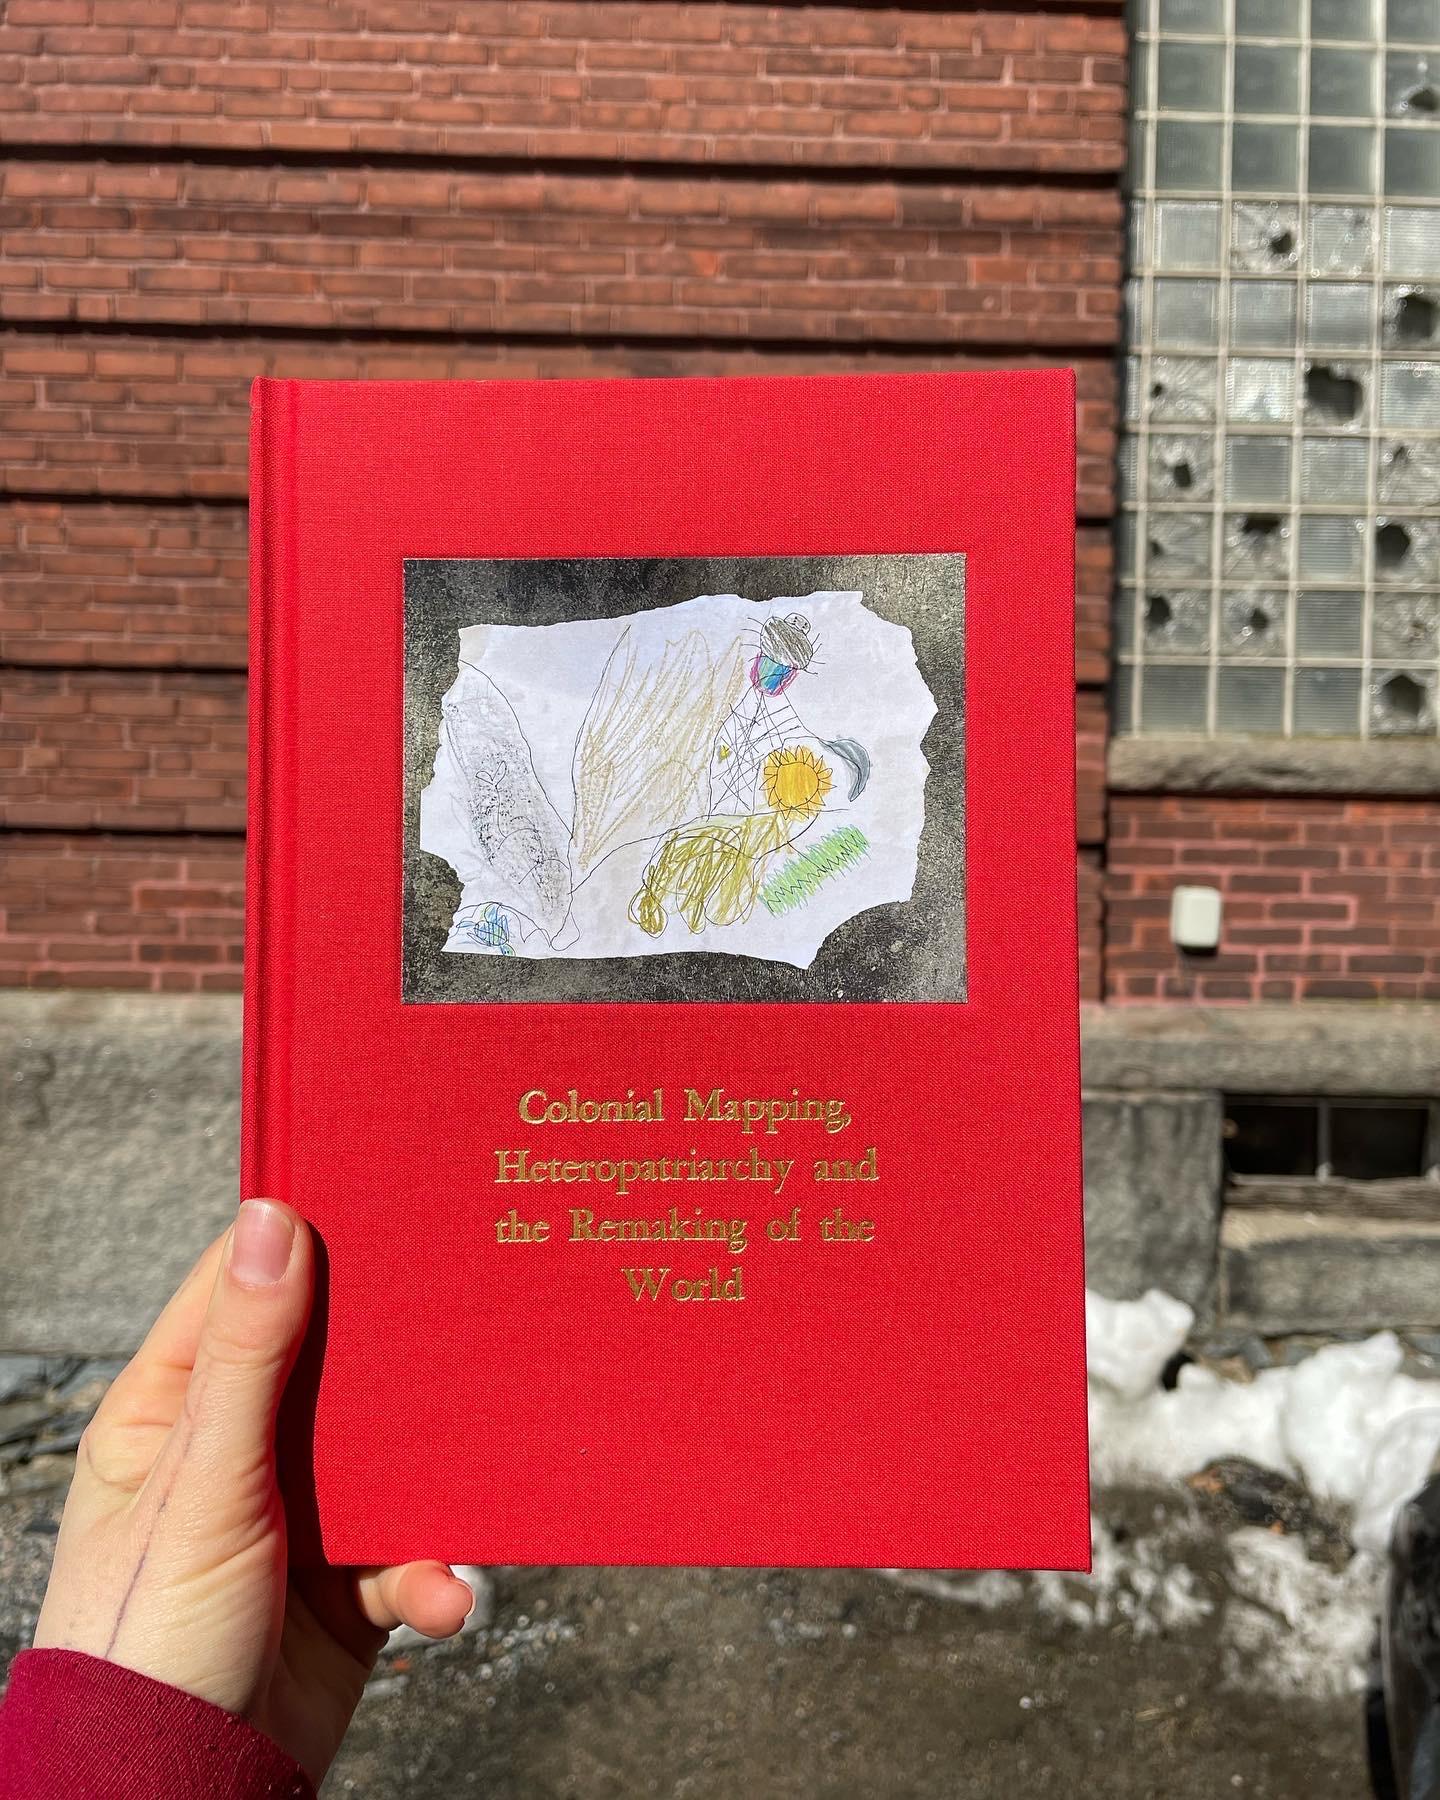 A hand holding a red book titled, "Colonial Mapping, Heteropatriarchy, and the Remaking of the World", with an image of a drawing.